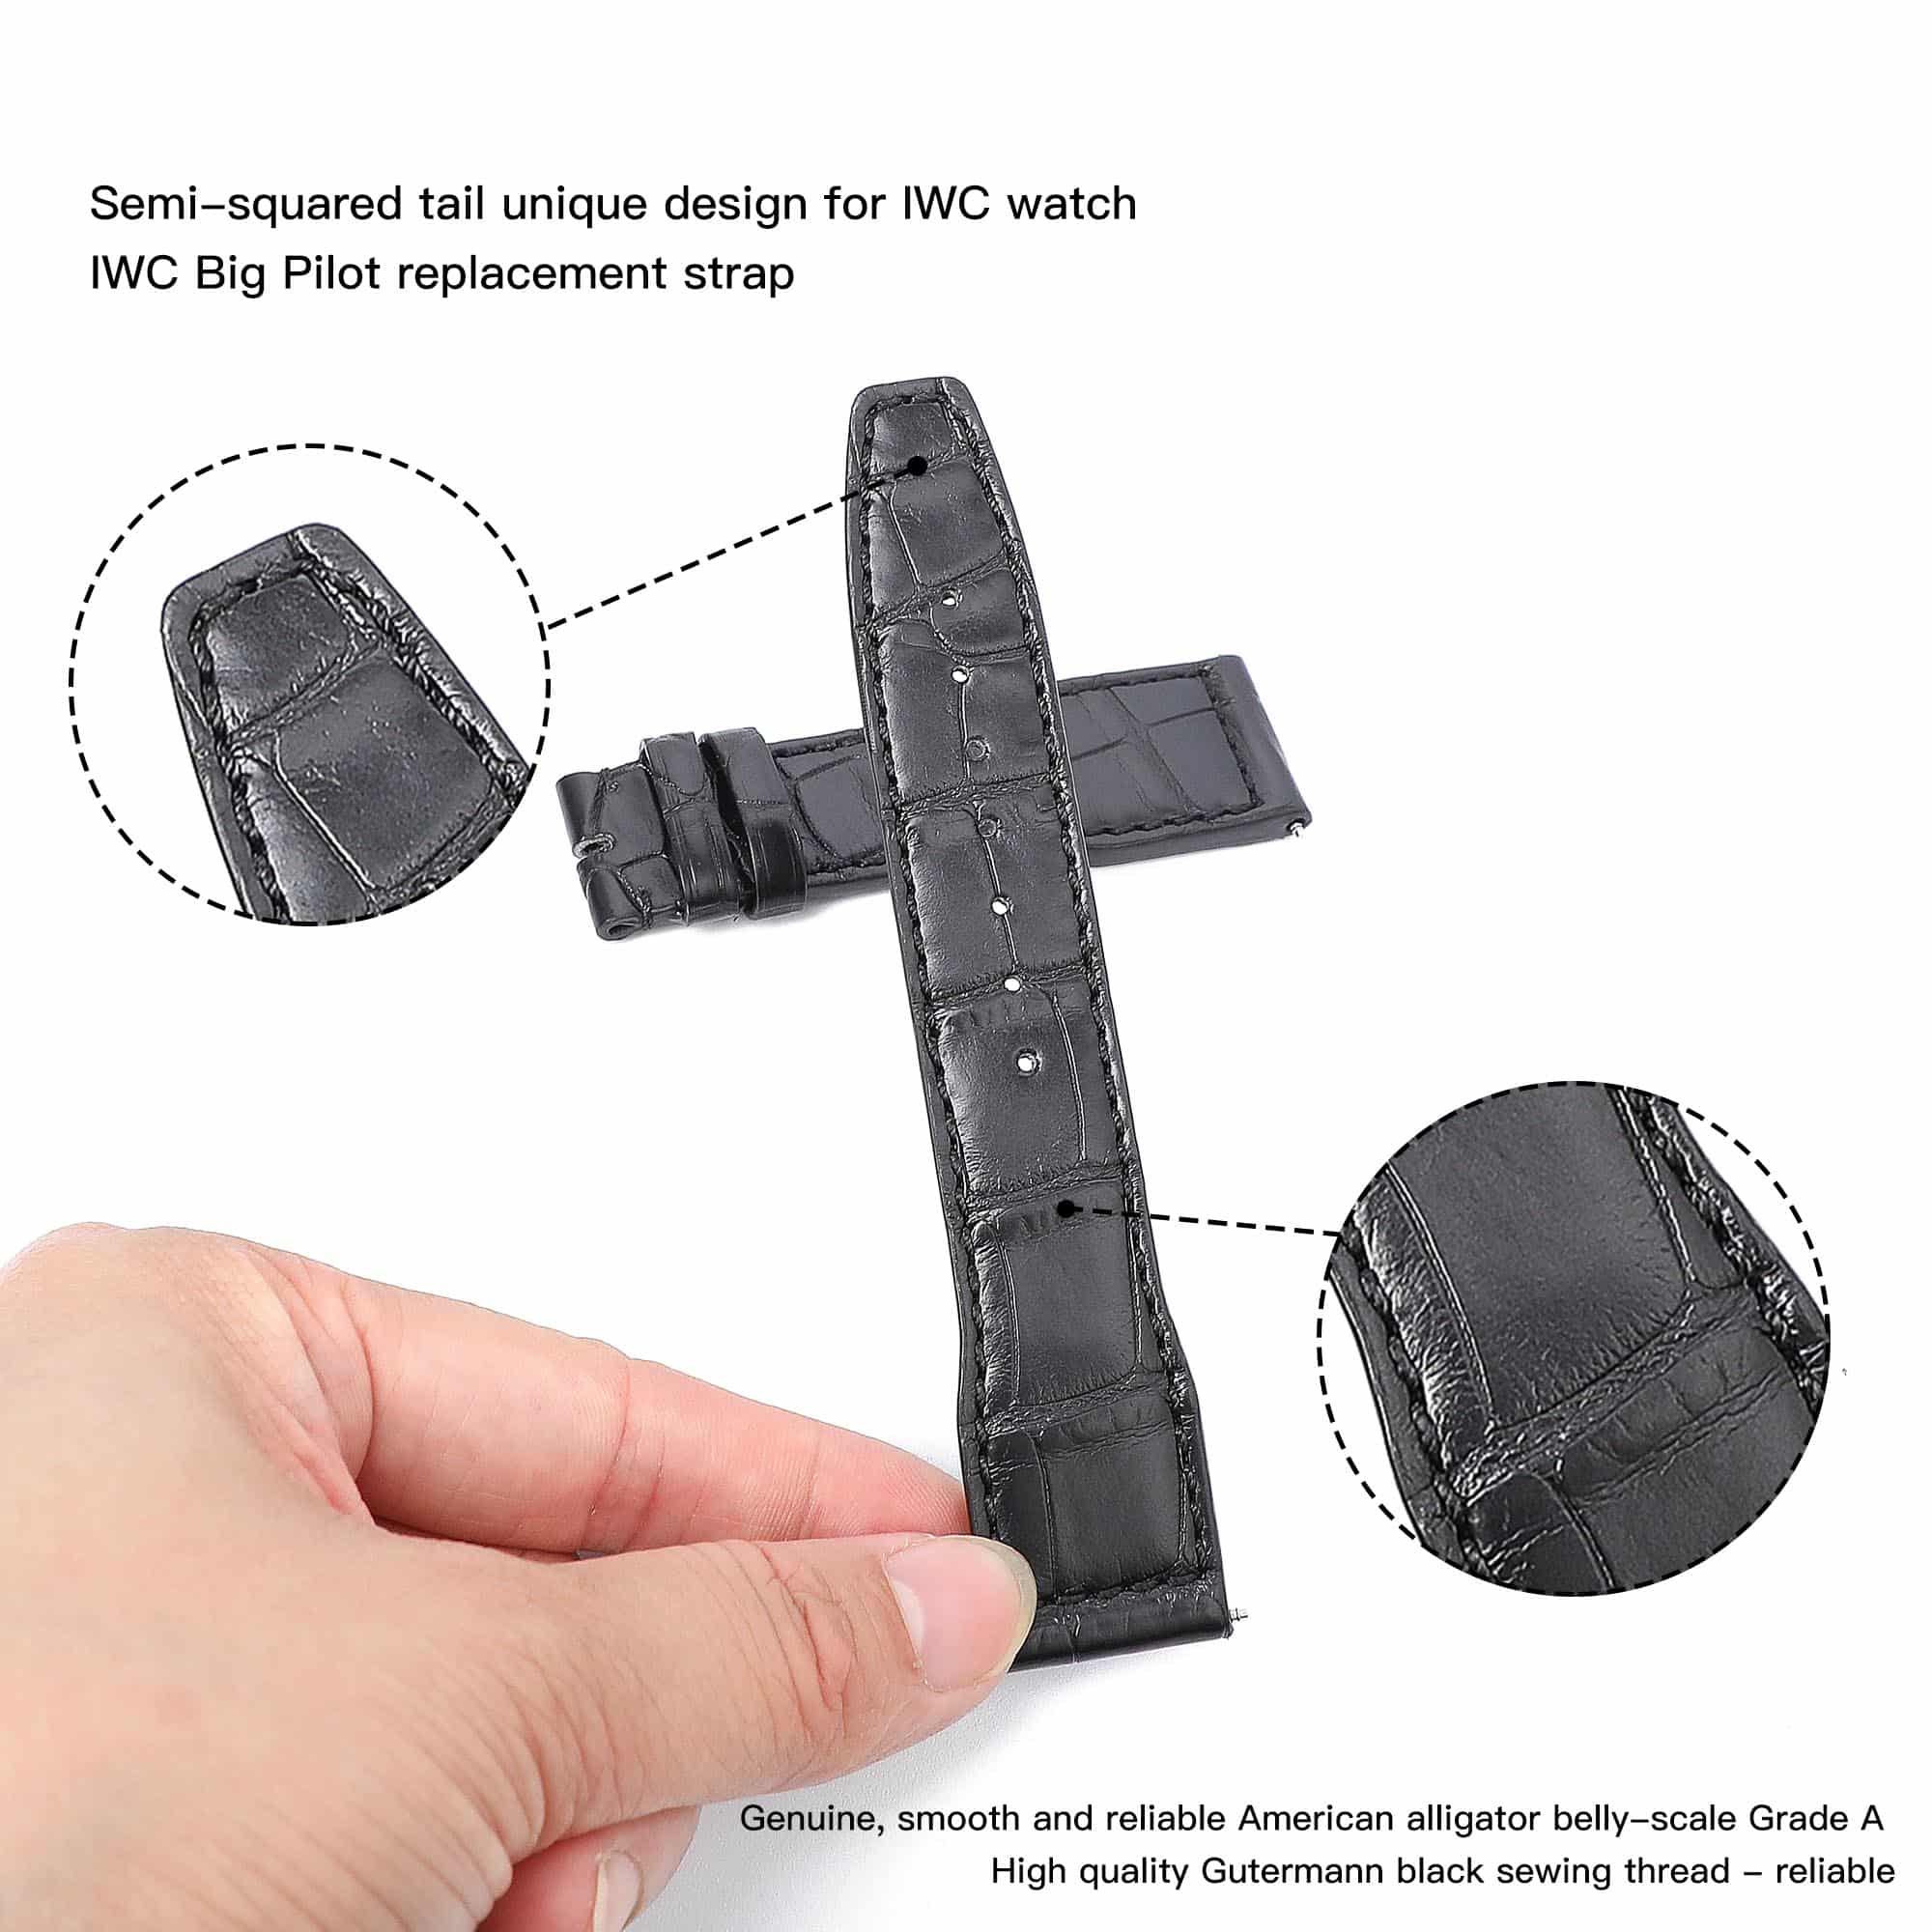 Custom best quality handmade black alligator crocodile 20mm 21mm leather IWC watch straps and watch bands replacement for IWC Pilot's watch Mark XVIII Chronograph - shop the grade A crocodile leather watchbands online